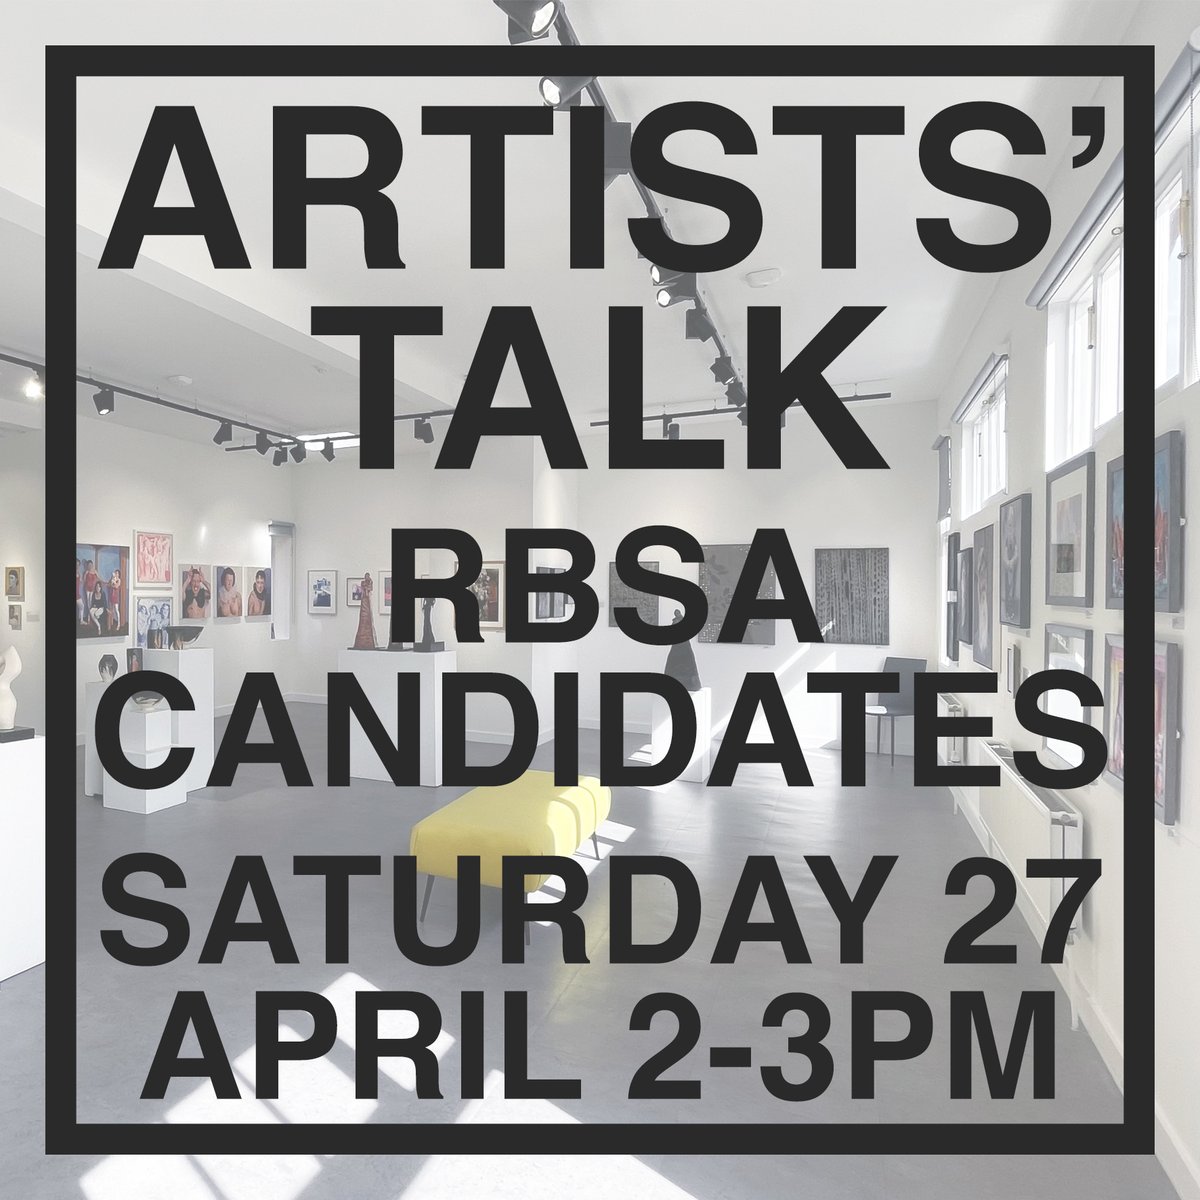 Join Eric Gaskell ARBSA, Fred Jones ARBSA, Elena Thomas ARBSA, and Charles Weston ARBSA in the Gallery tomorrow from 2-3pm for an artists' talk. Artists will be talking about their artistic practice and their journey with the RBSA so far.